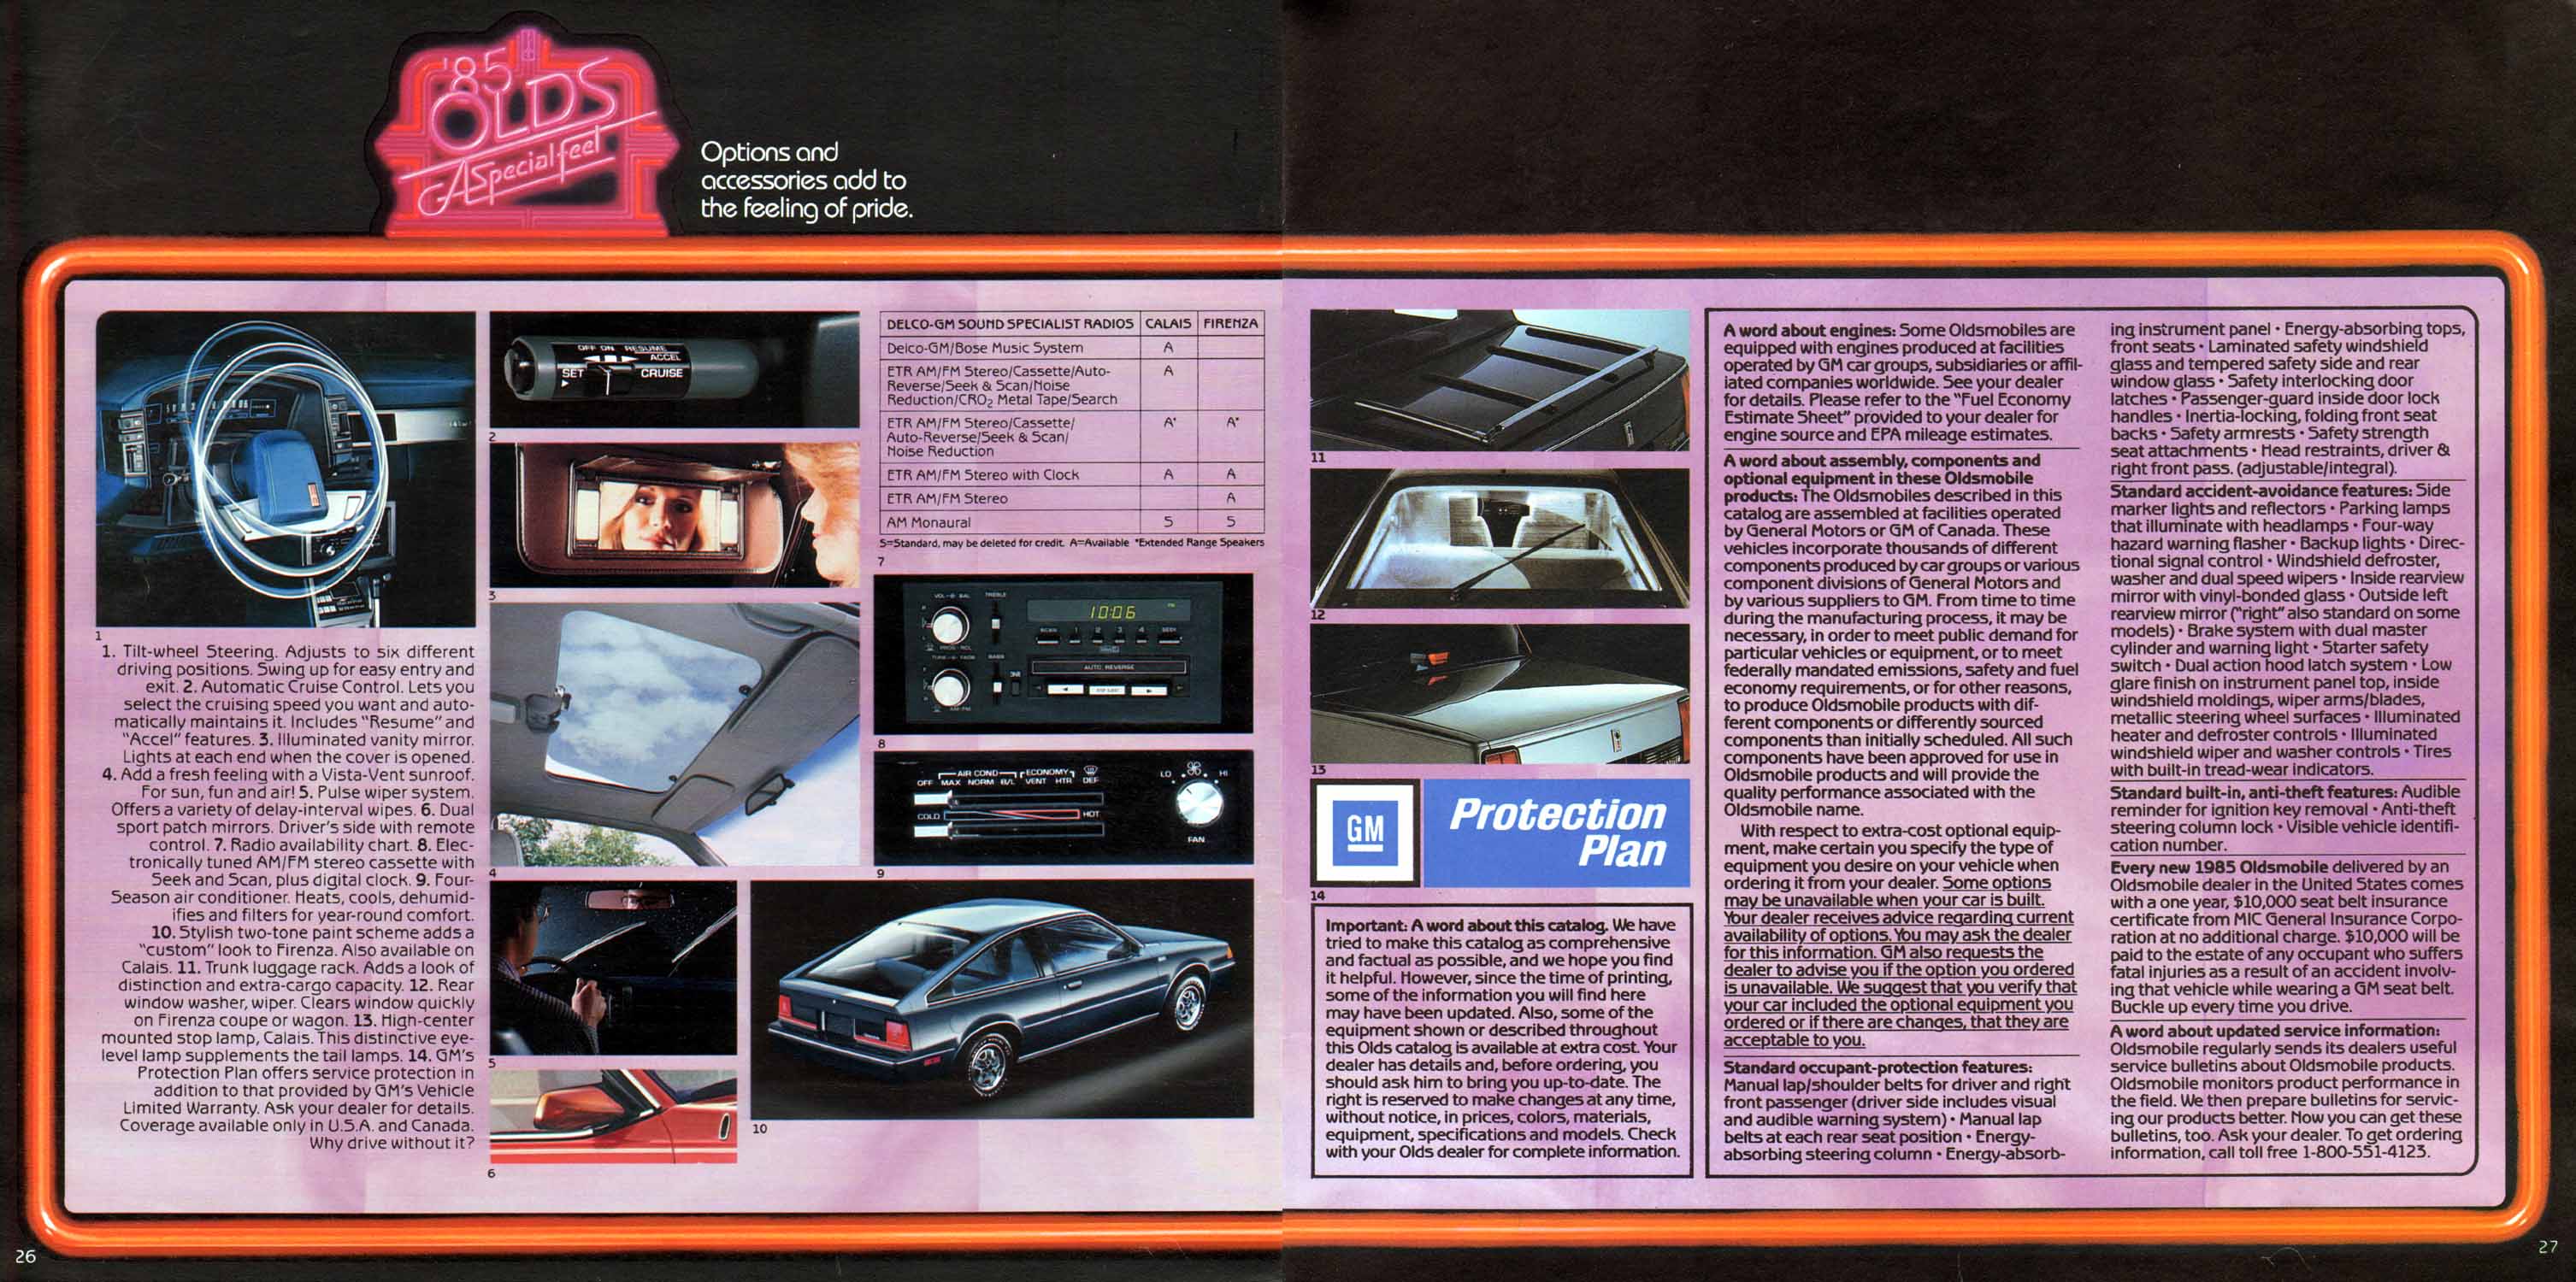 1985_Oldsmobile_Small_Size-26-27